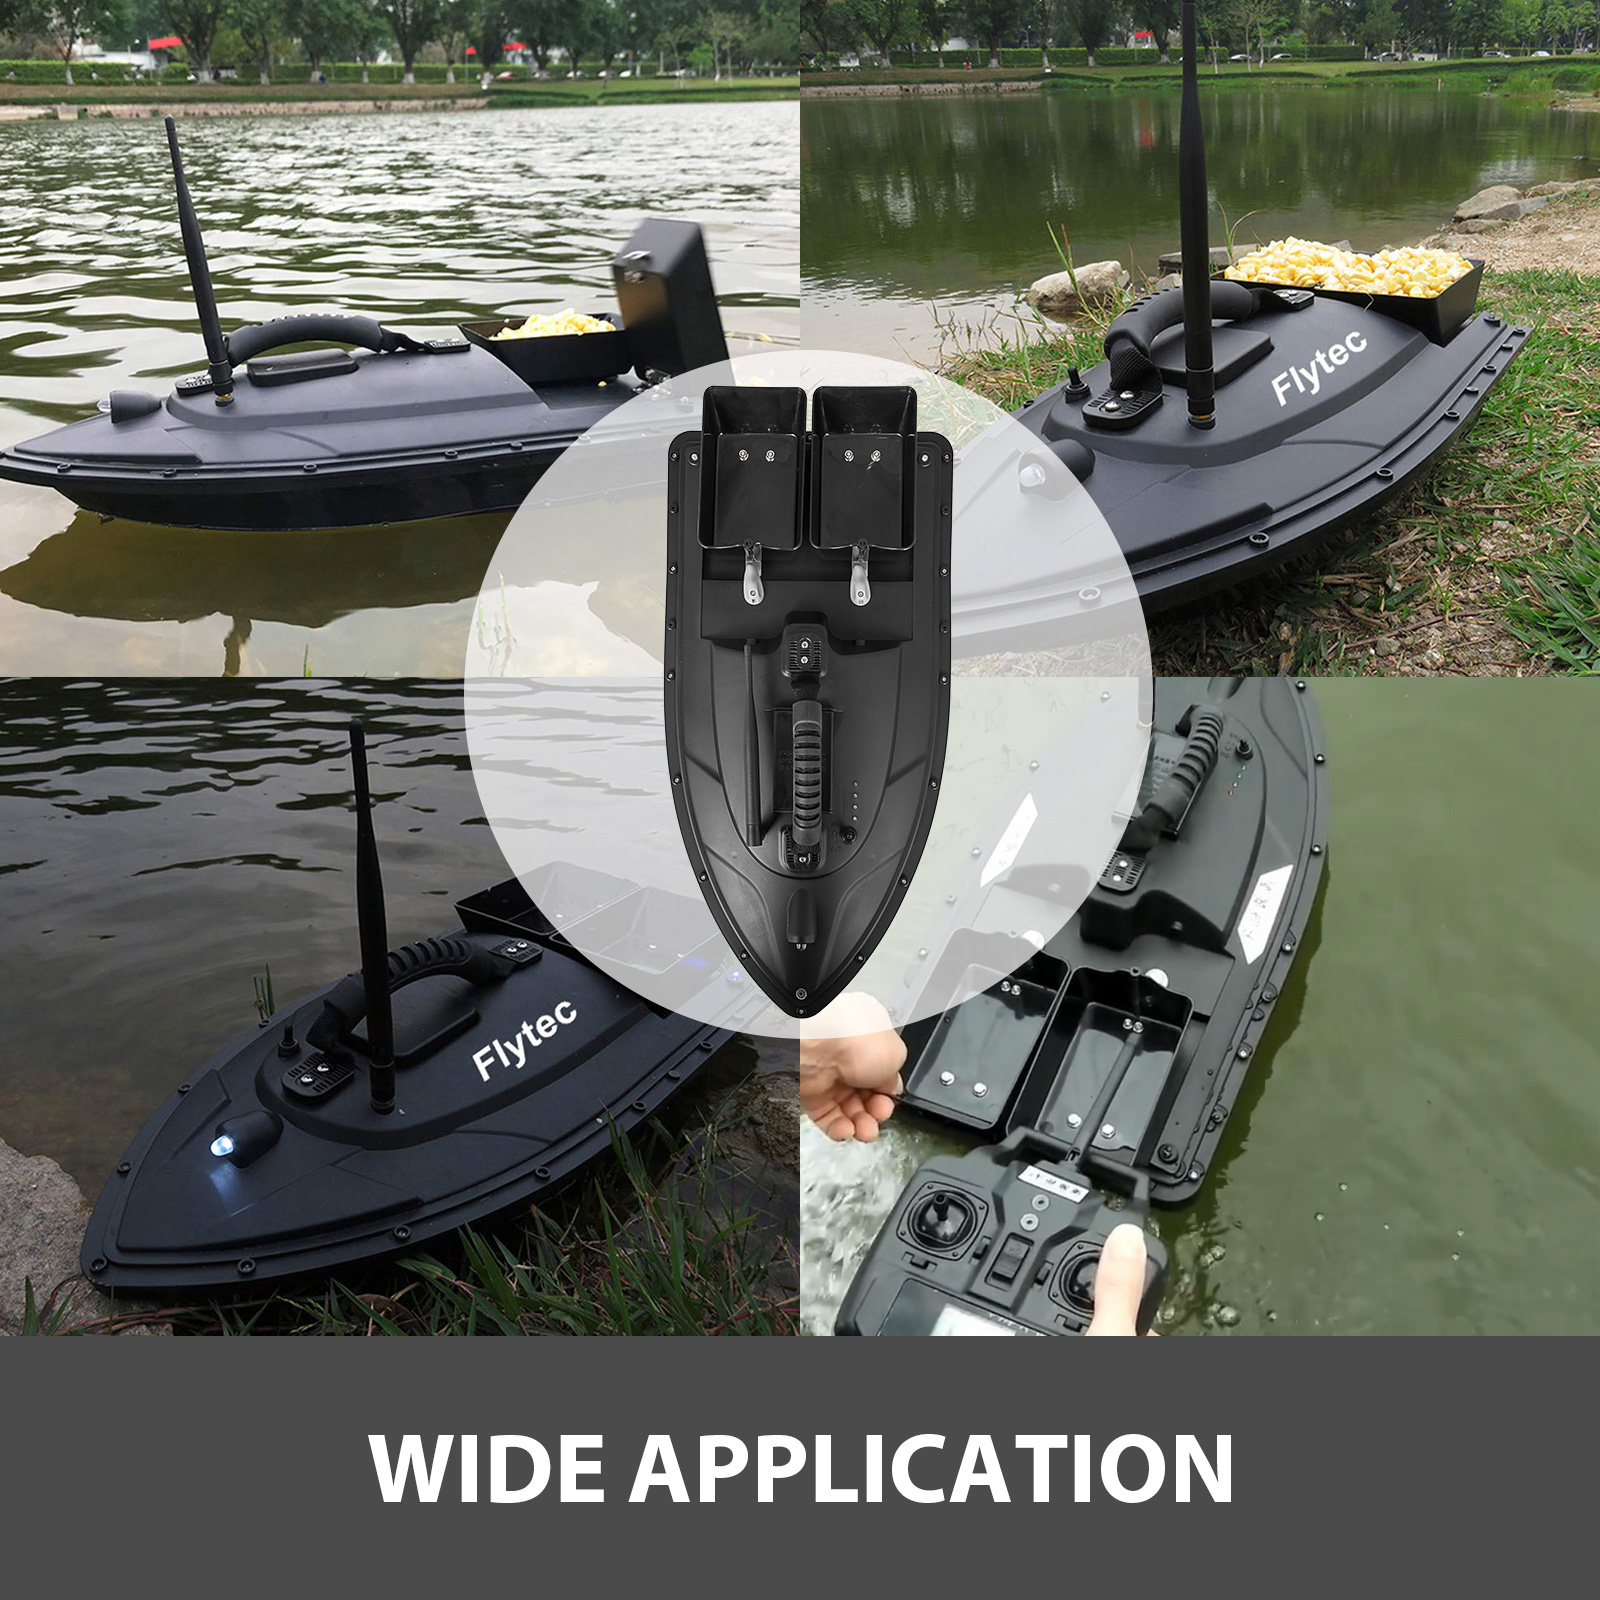 GPS Fishing Bait Boat with 3 Bait Containers Automatic Bait Boat with  400-500M Remote Range